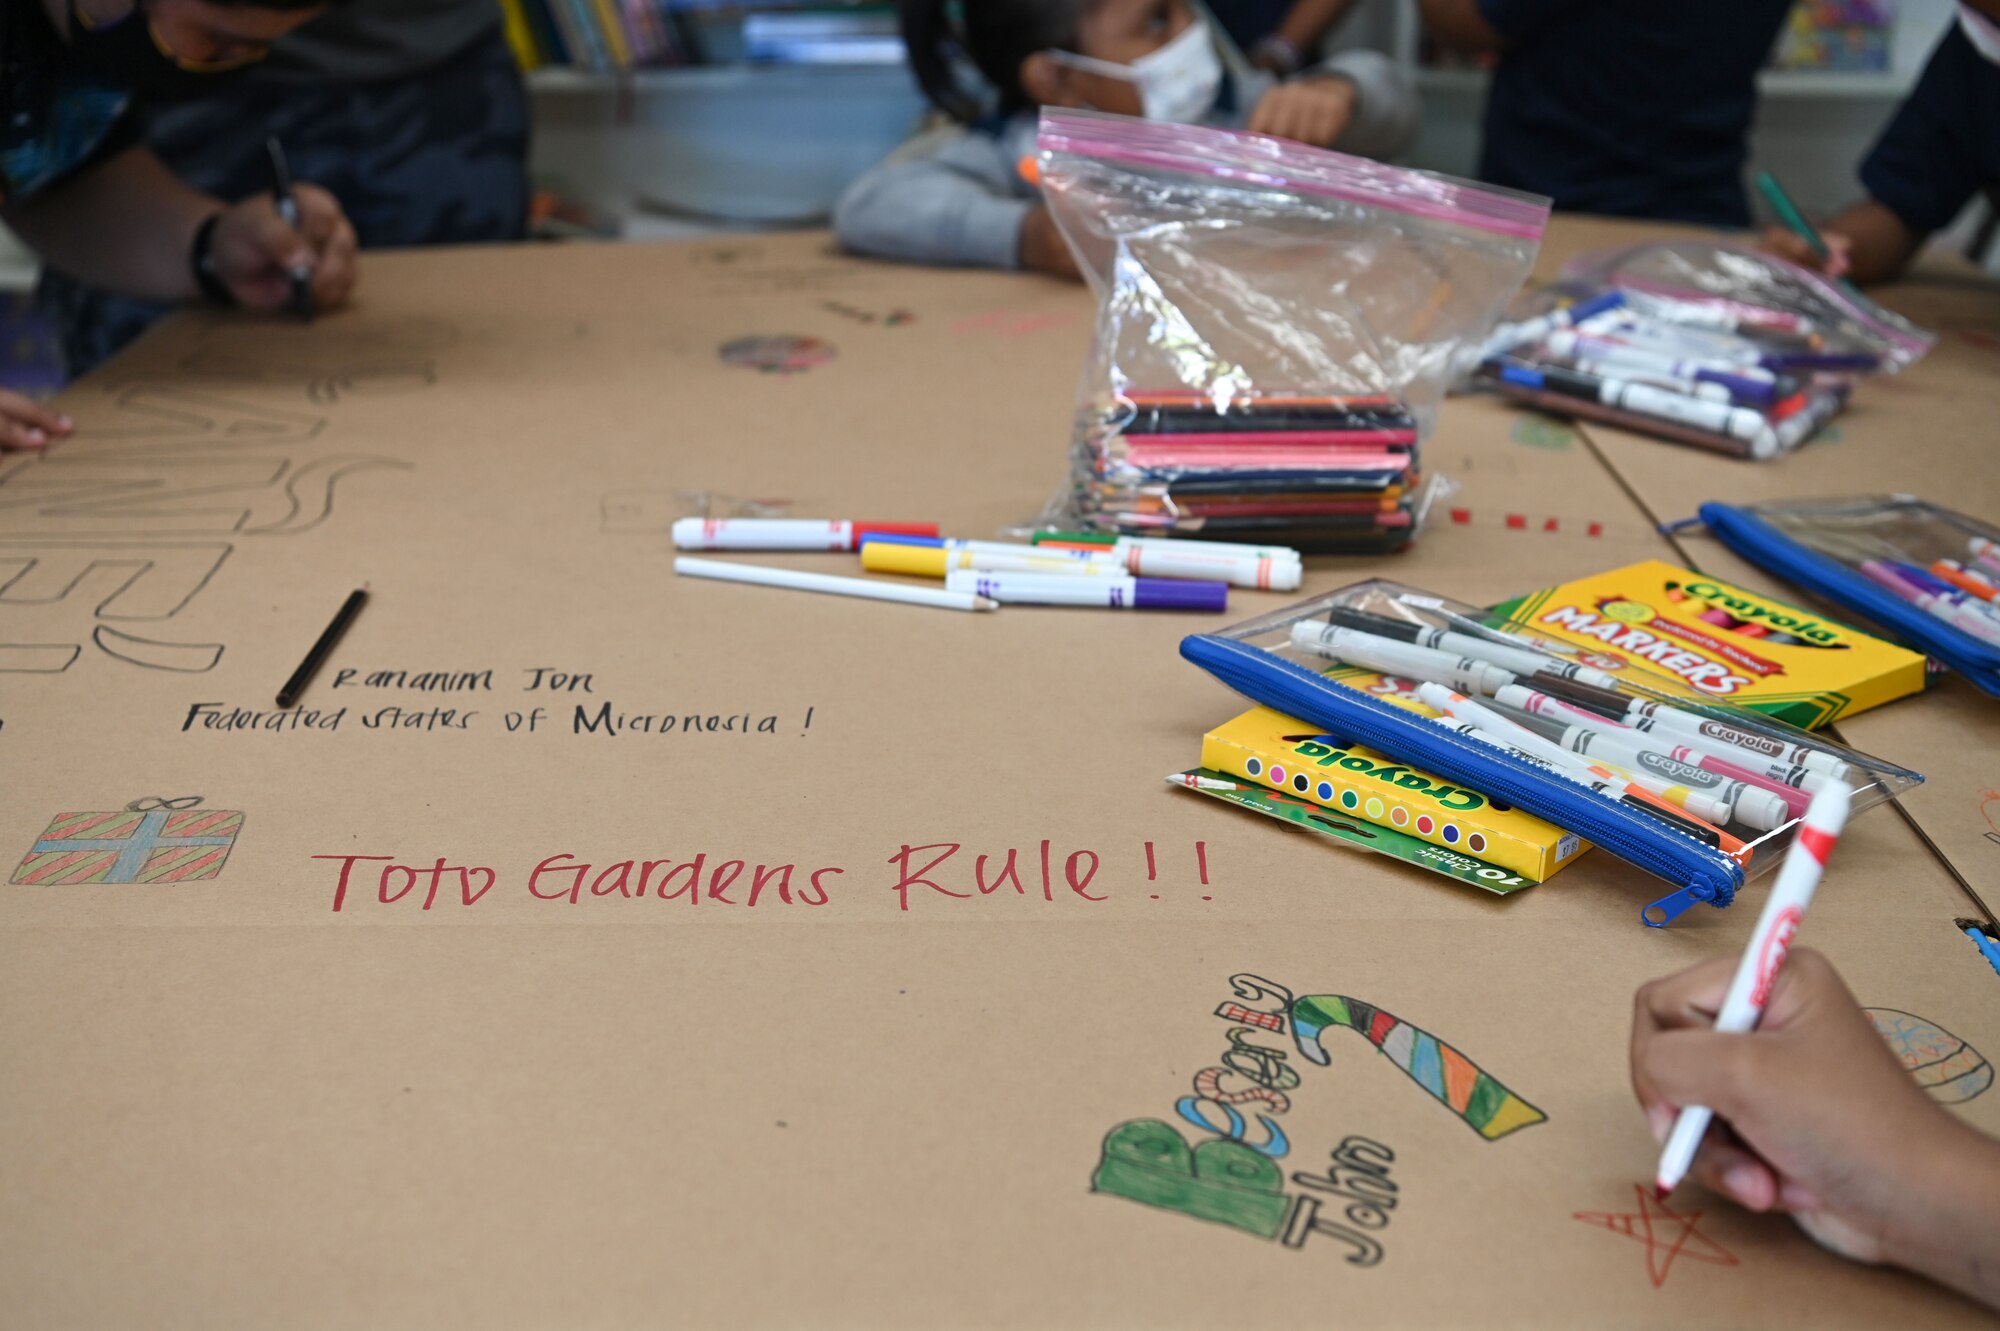 Children with Mañe'lu and Airmen from Andersen Air Force Base, Guam, draw and write messages on a box during a volunteer event at Toto Garden, Mongmong-Toto-Maite, Nov. 18th, 2021. The two Airmen from 36 CPTS volunteered through Andersen Air Force Base’s Sister Village Sister Squadron program and joined the children with Mañe'lu to decorate boxes that will be used during Operation Christmas Drop with donated supplies. (U.S. Air Force photo by Senior Airman Aubree Owens)